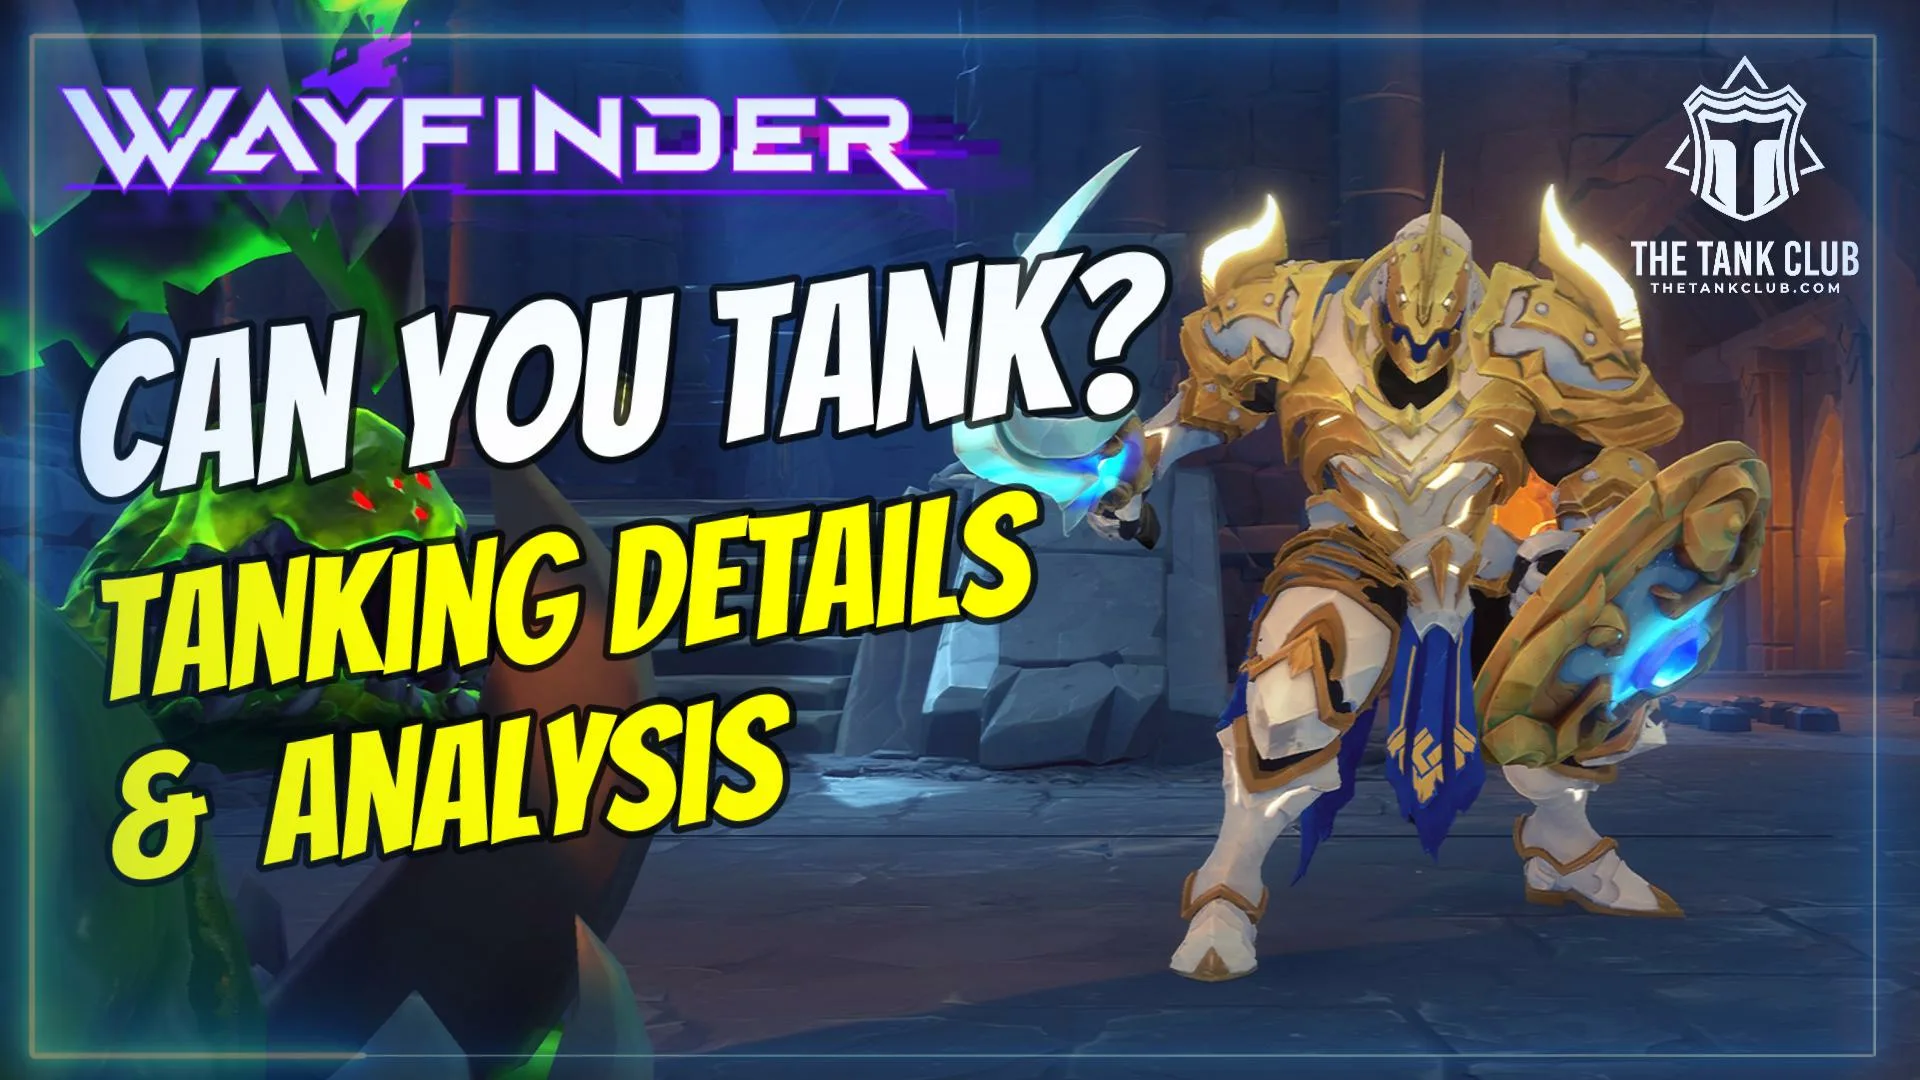 Can You Tank in Wayfinder?